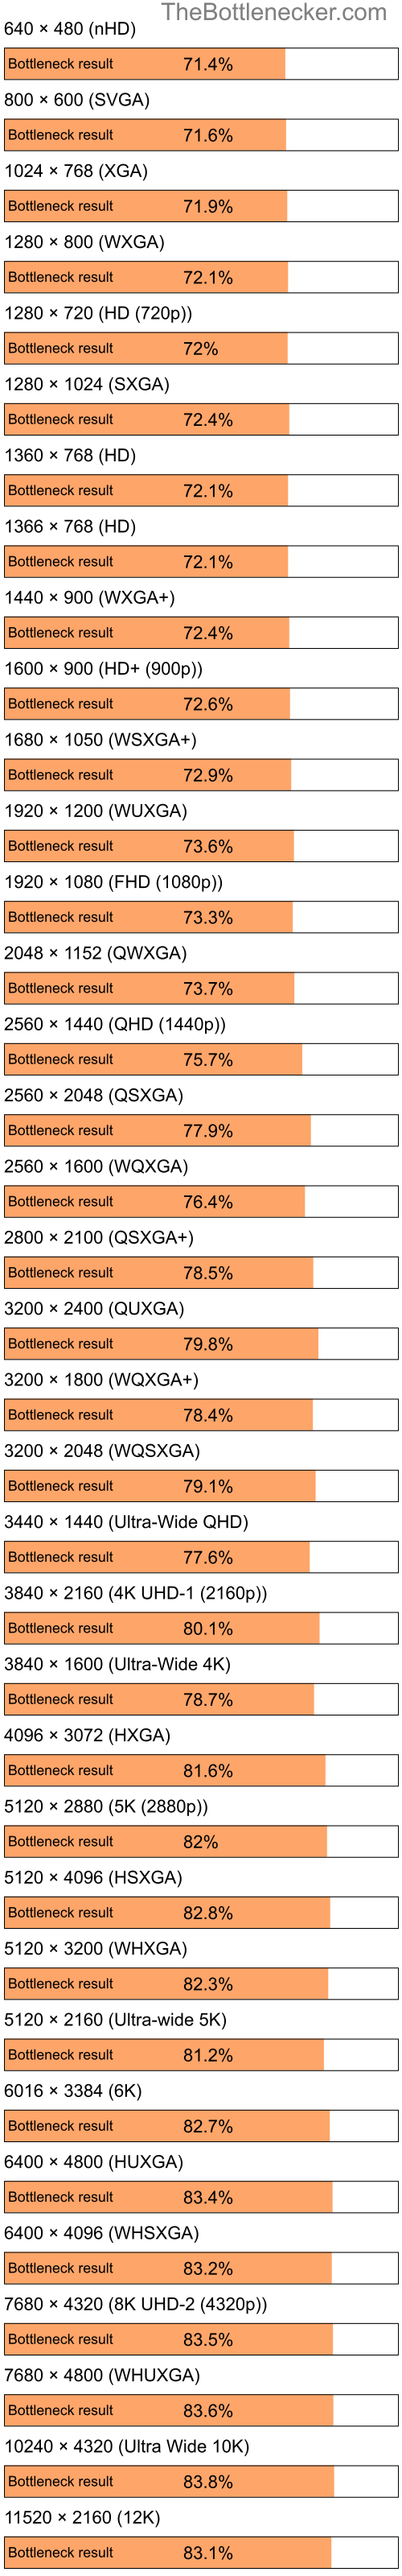 Bottleneck results by resolution for Intel Atom Z520 and AMD Radeon X1300 in7 Days to Die